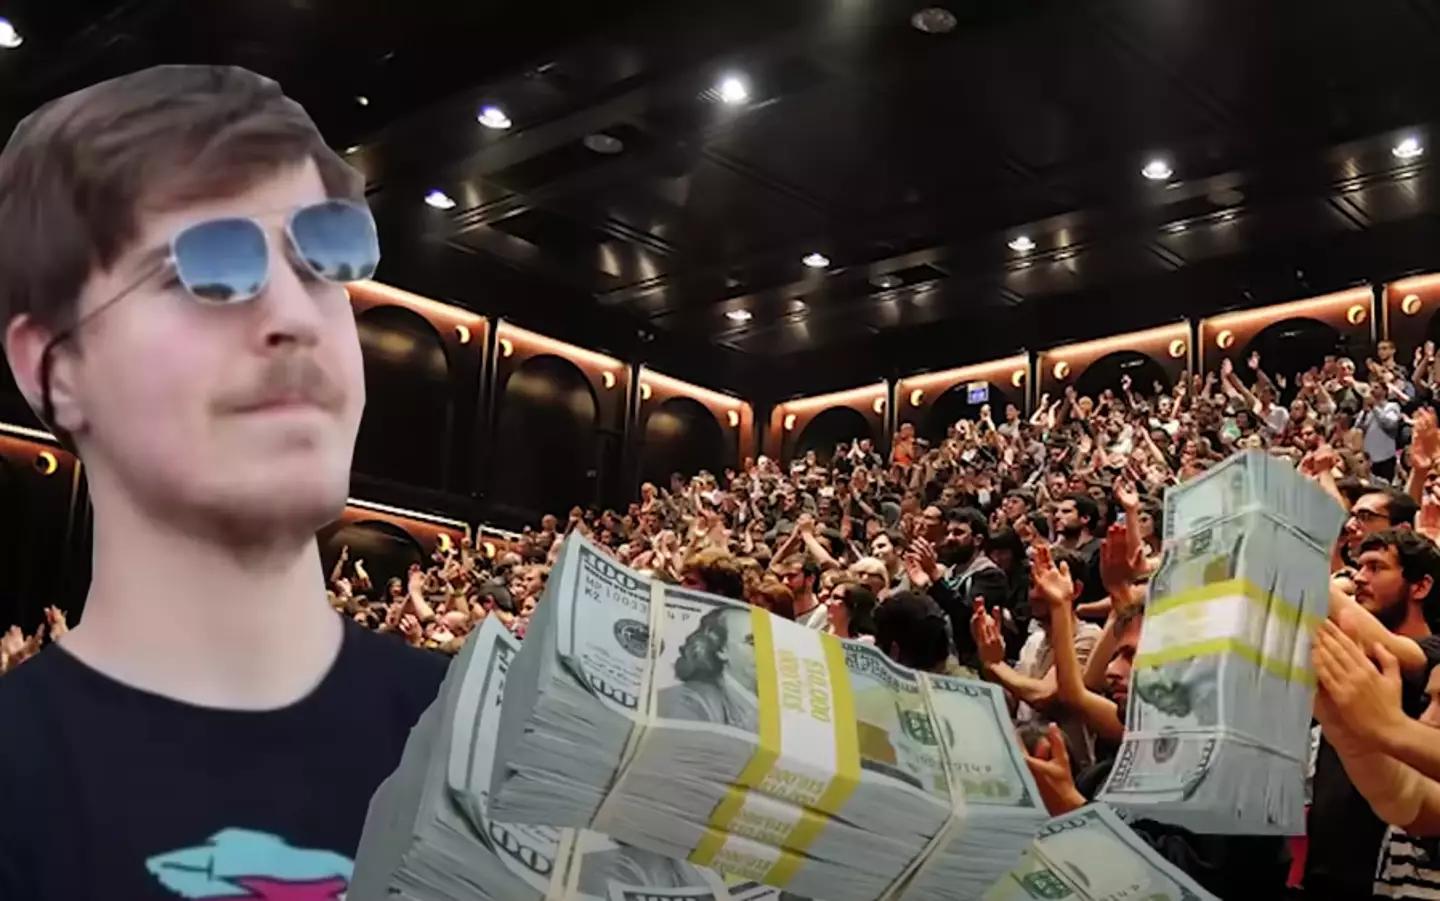 Despite some people doubting his motivations, MrBeast explained invests 'never see[s] a single penny' from a channel he's built around his nonprofit.